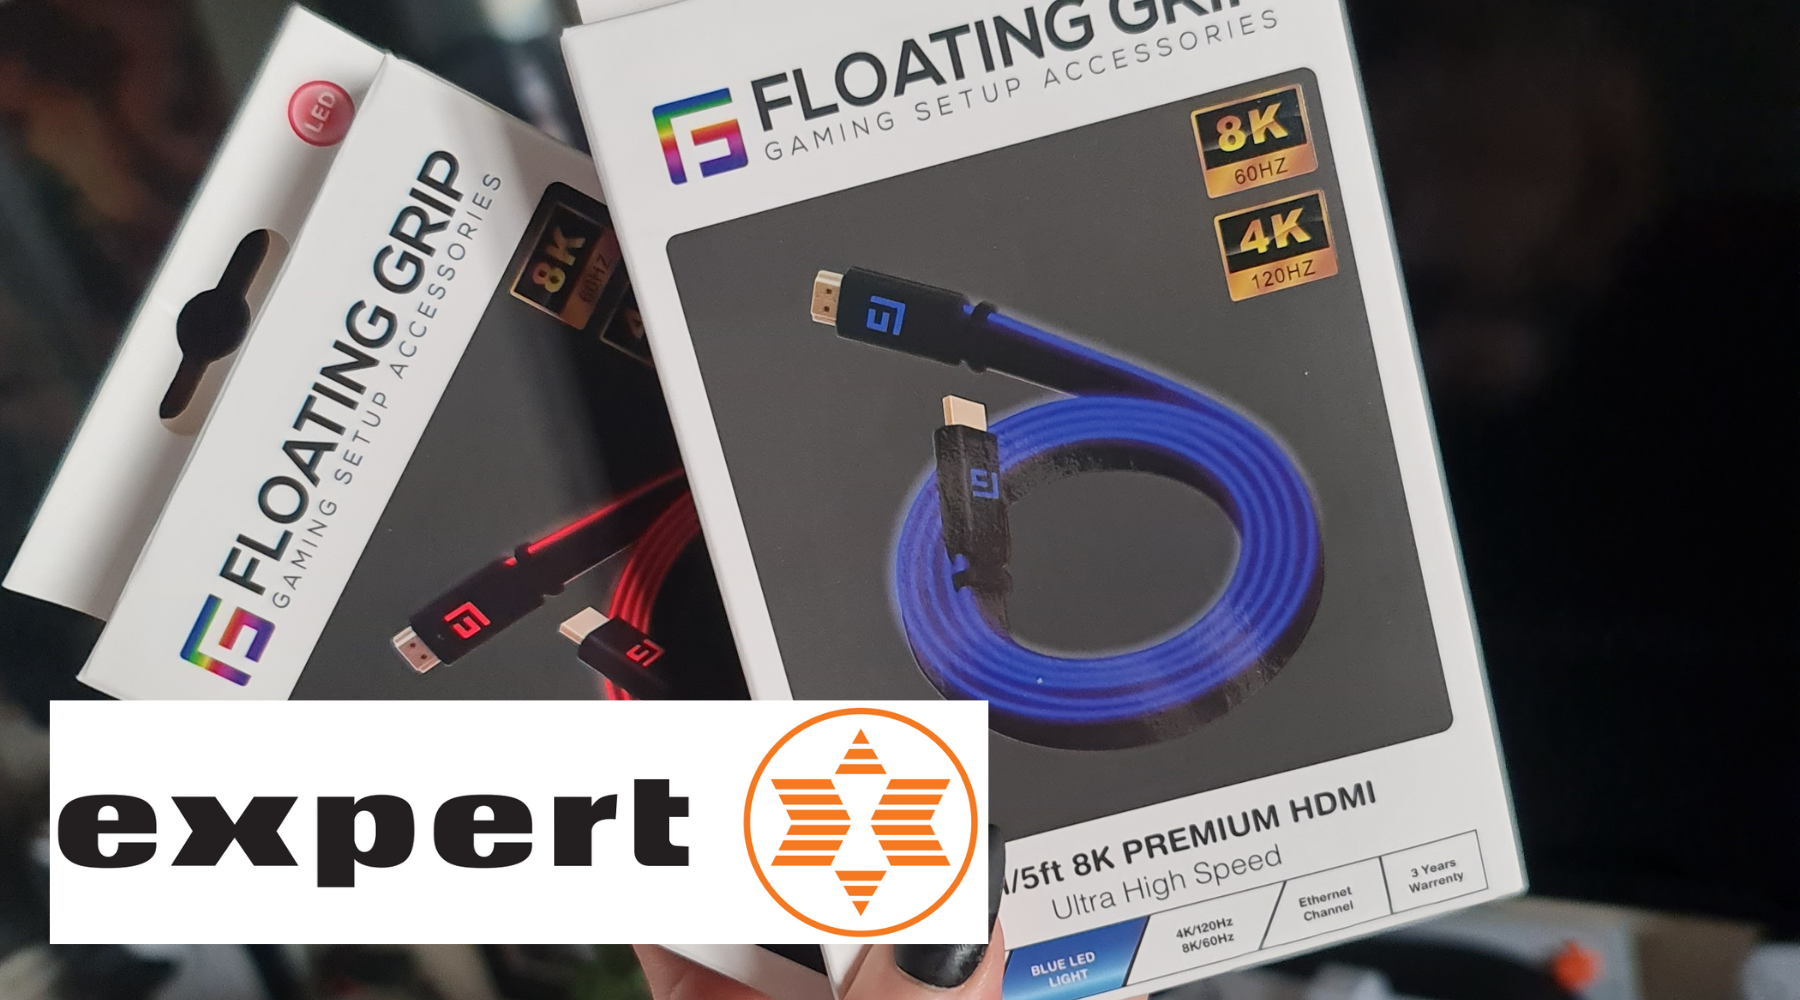 FLOATING GRIP Takes Germany by Storm: Now Available at Expert